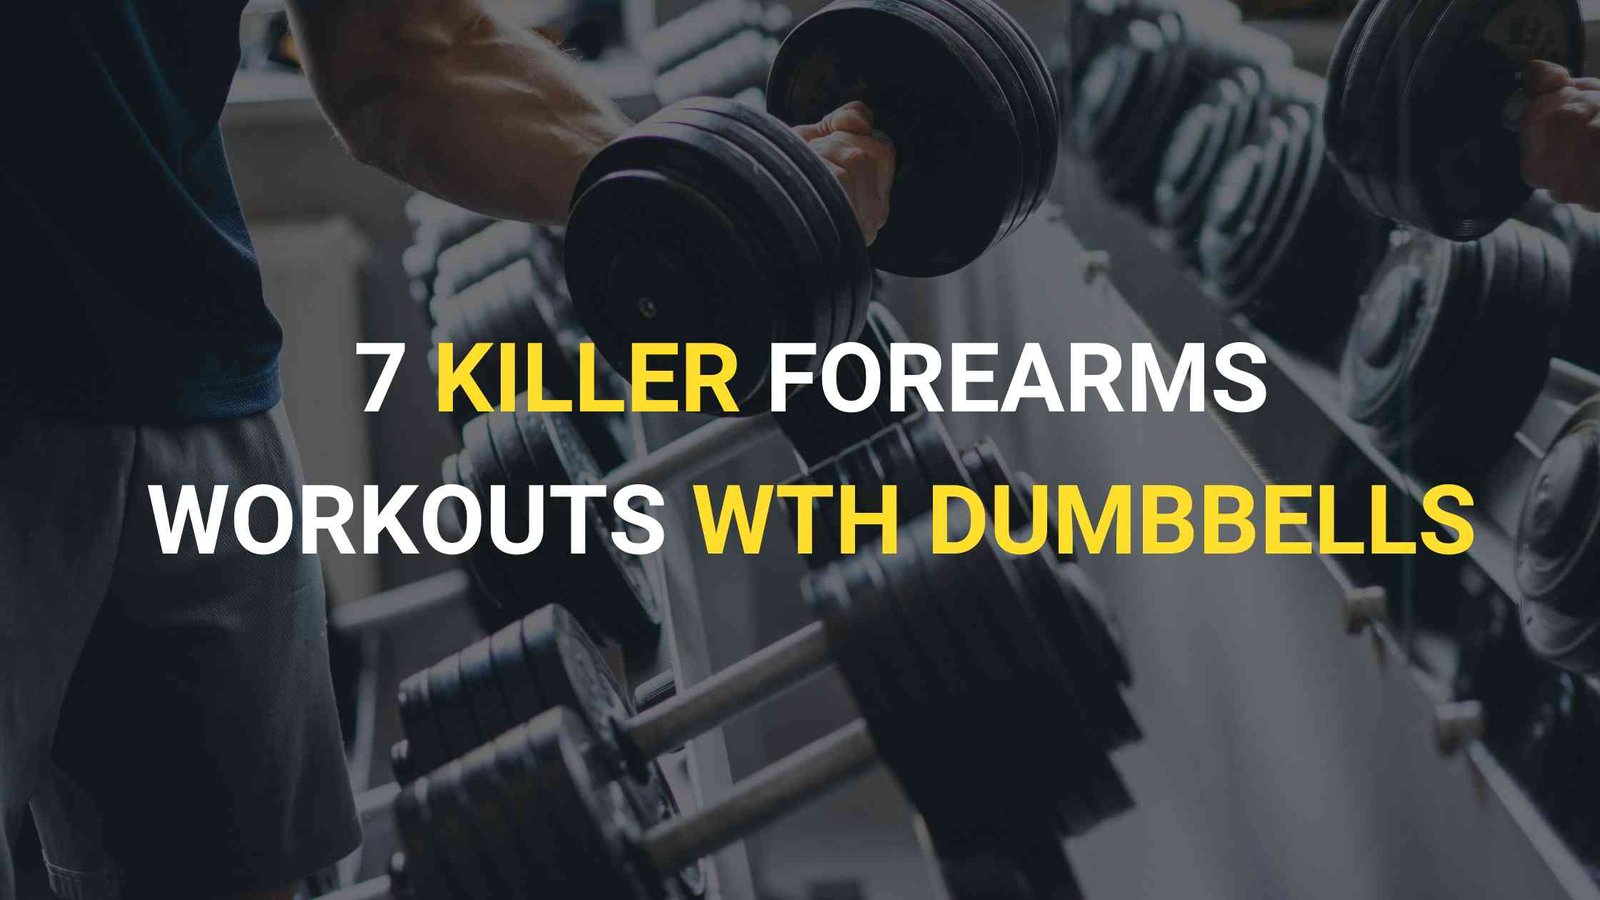 dumbbell exercises for forearms